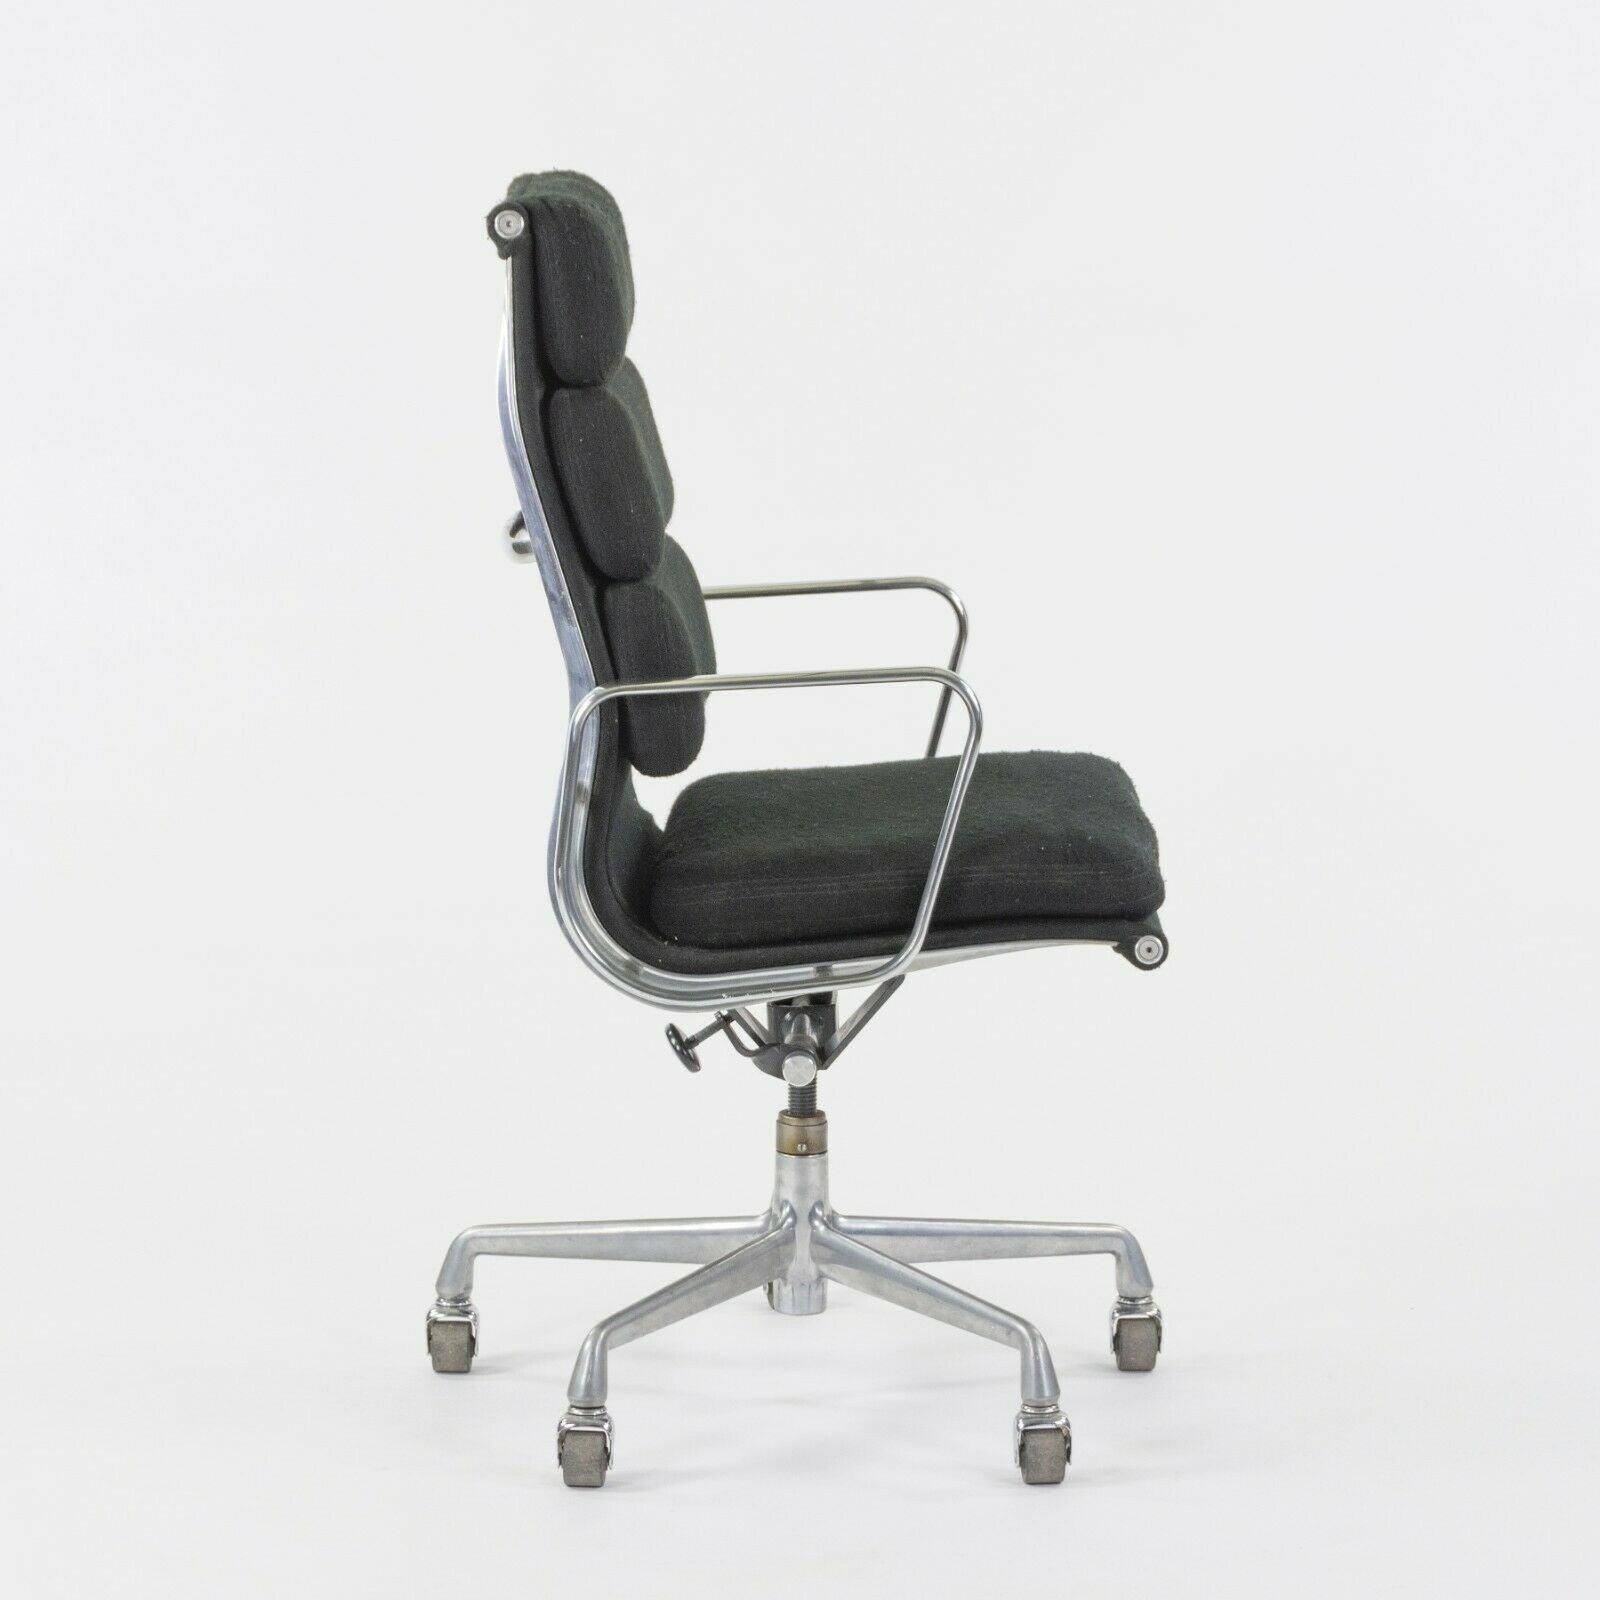 Listed for sale is a vintage Herman Miller Eames Aluminum Group executive soft pad desk chair. This is a rare example, which was produced in the 1980s and was specially ordered in a black fabric upholstery. Many of these examples were produced in